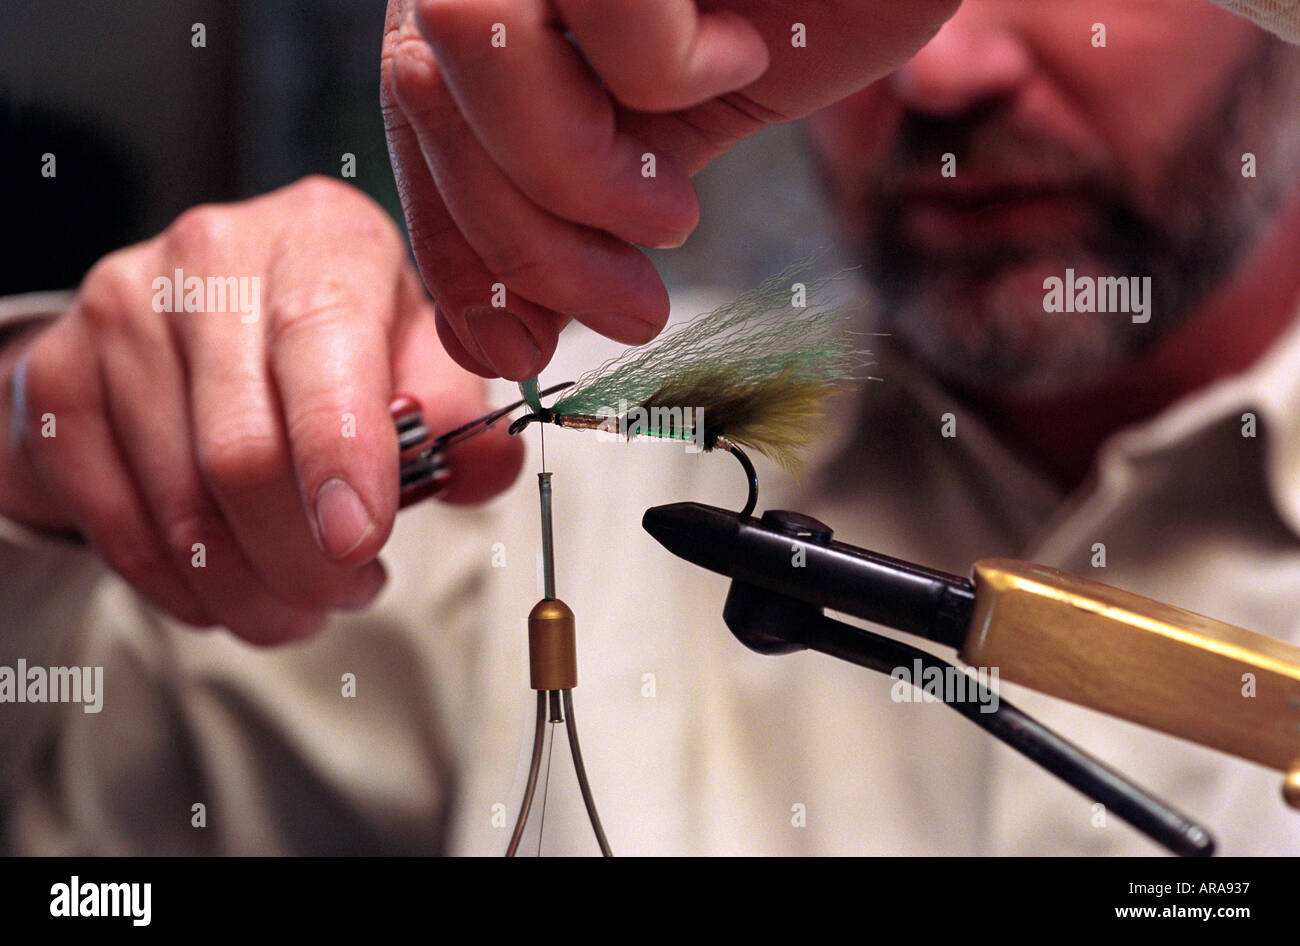 Making a fly for fly fishing Stock Photo - Alamy